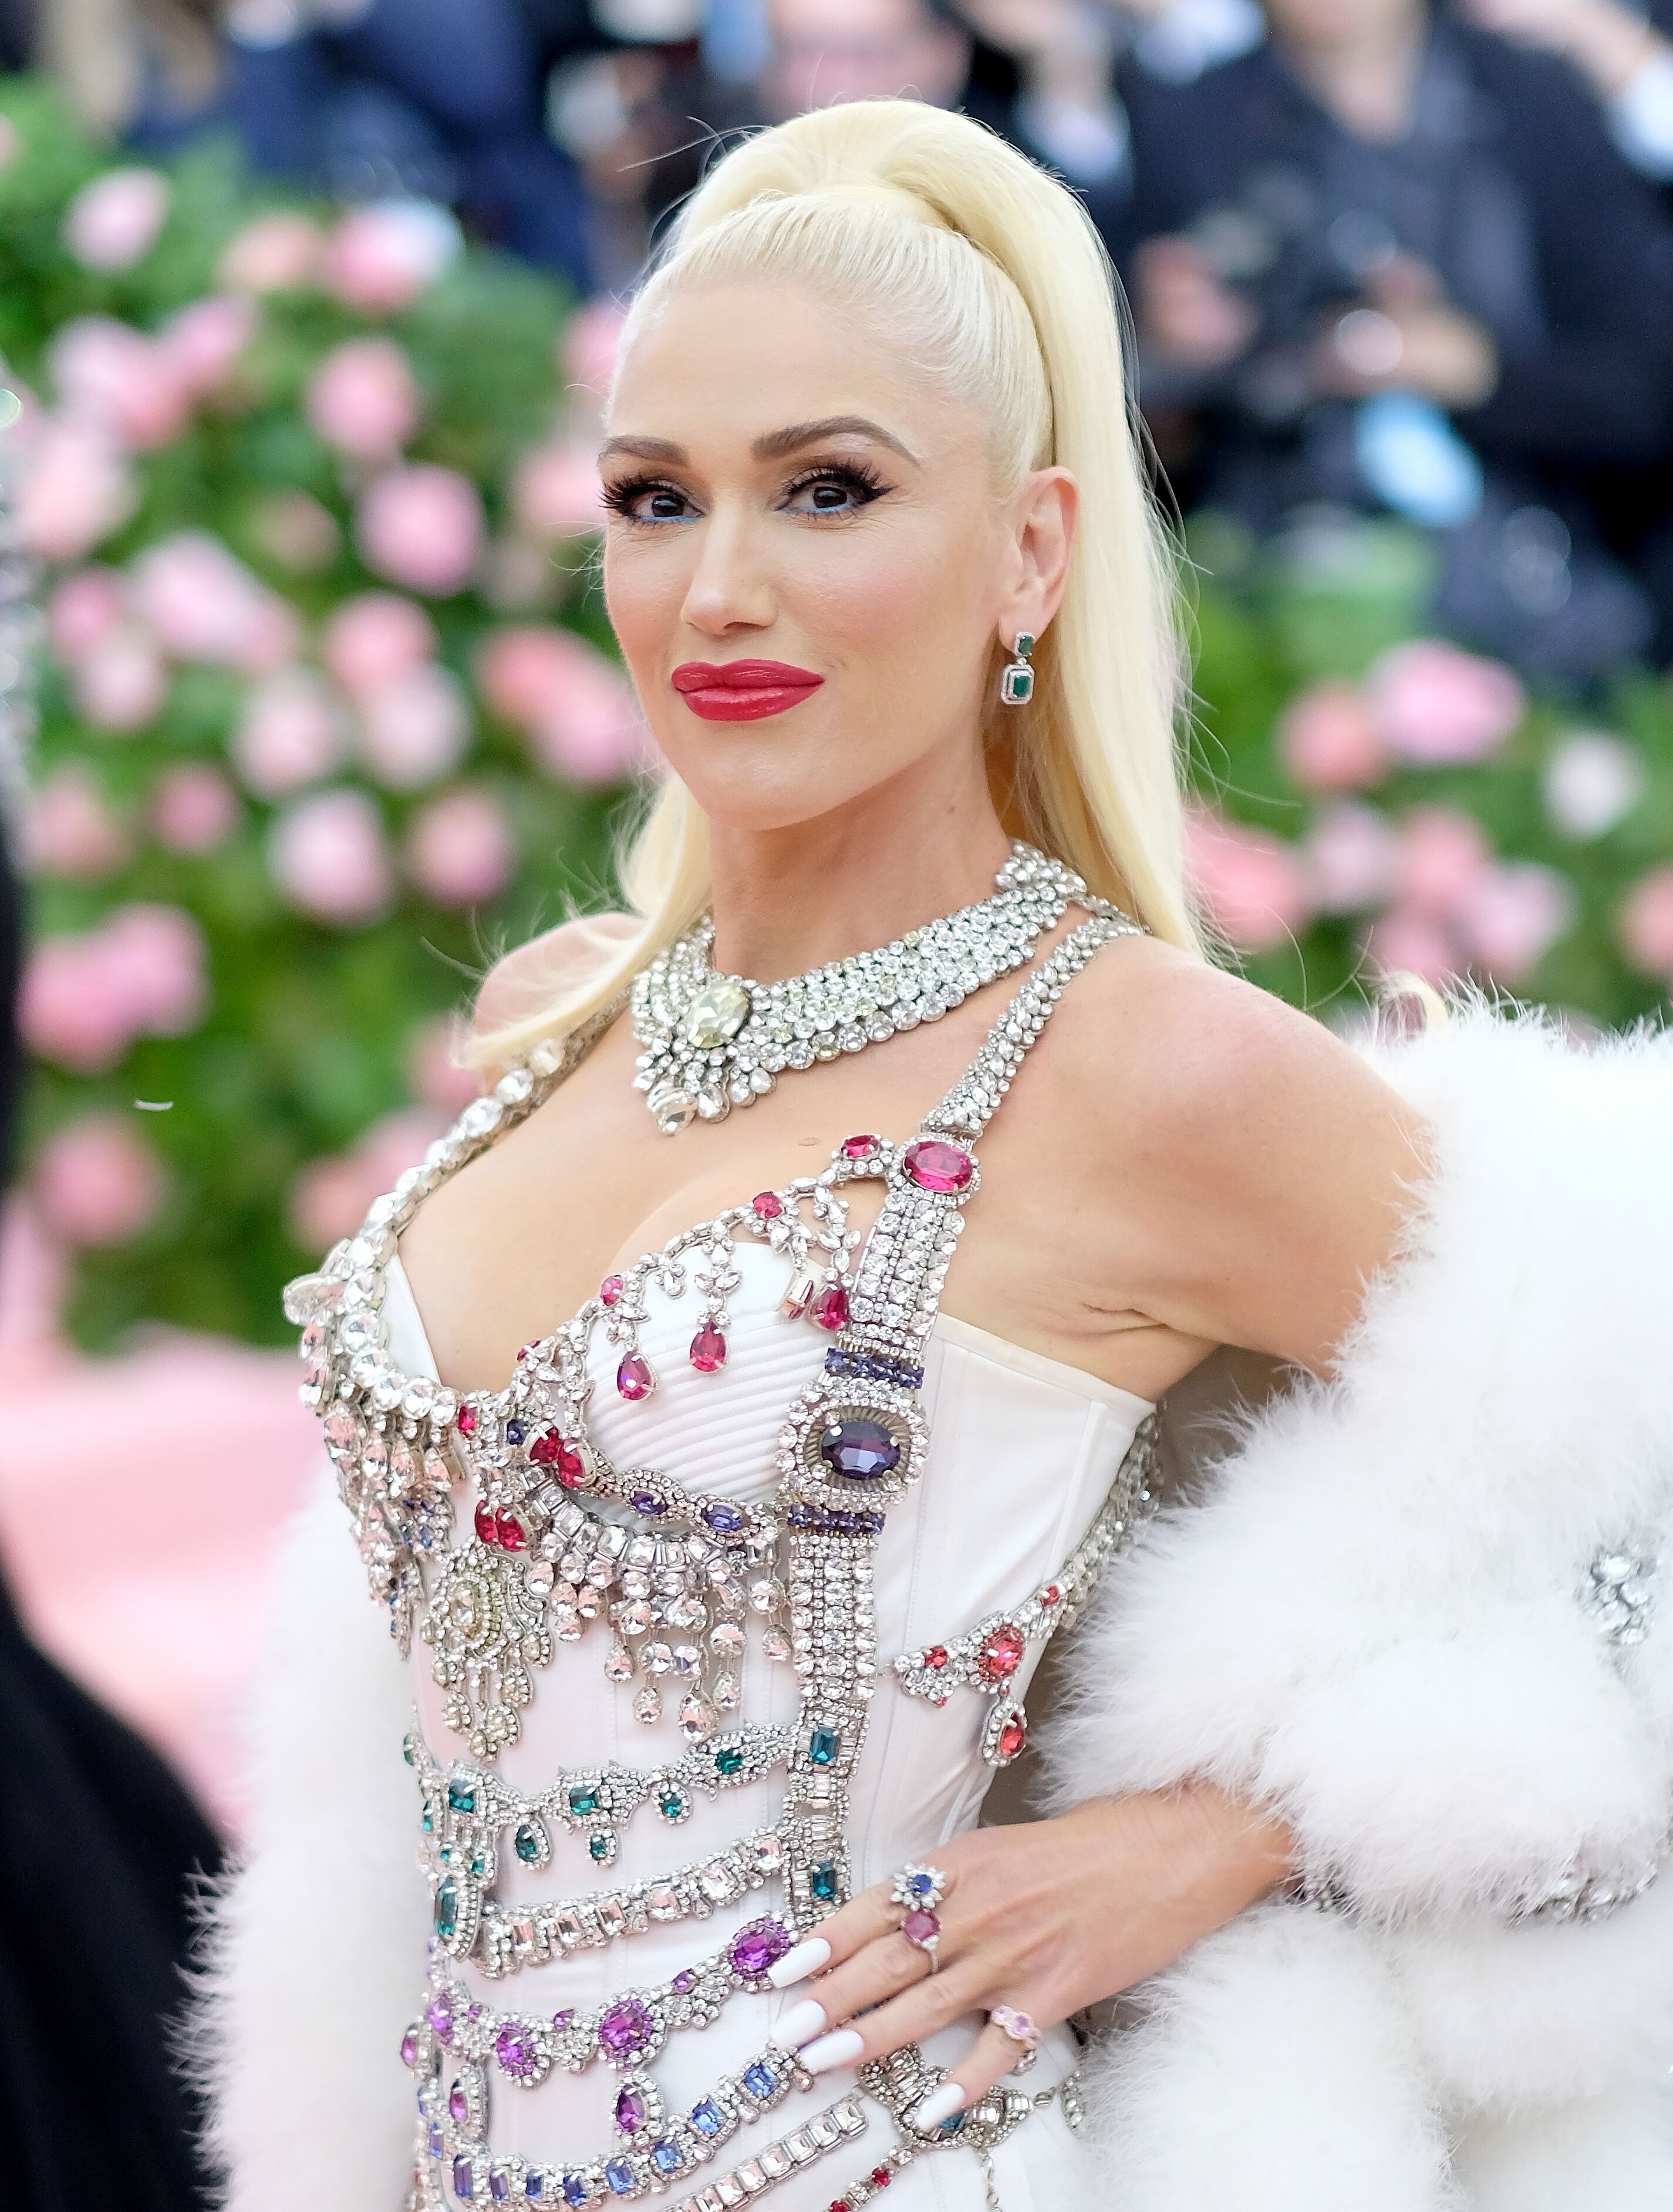 Gwen Stefani attends The 2019 Met Gala Celebrating Camp: Notes on Fashion at Metropolitan Museum of Art on May 06, 2019 in New York City | Photo: Getty Images